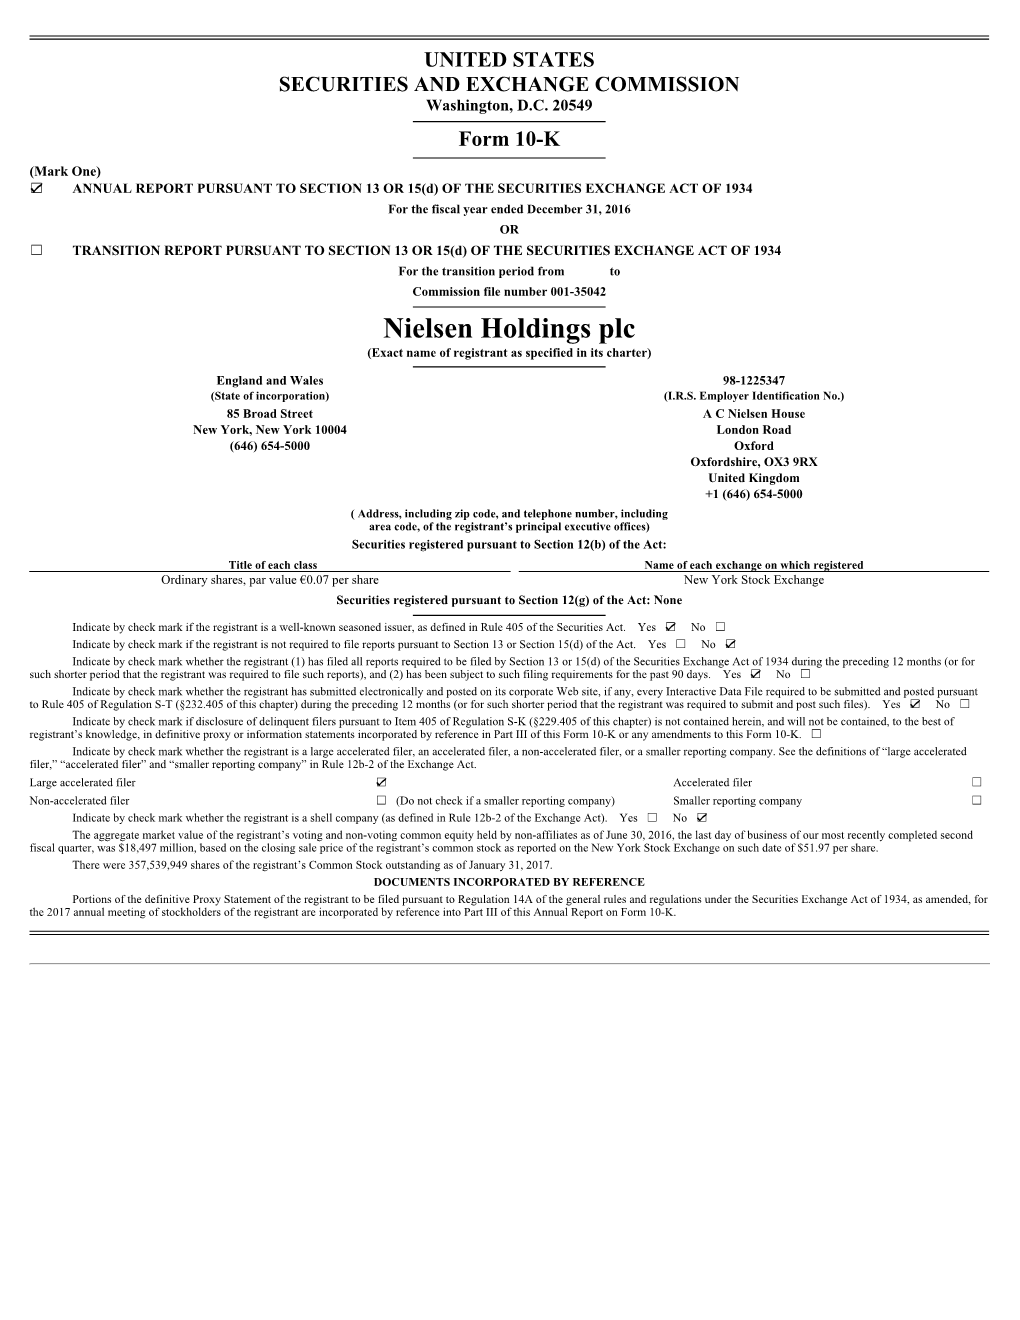 Nielsen Holdings Plc (Exact Name of Registrant As Specified in Its Charter)